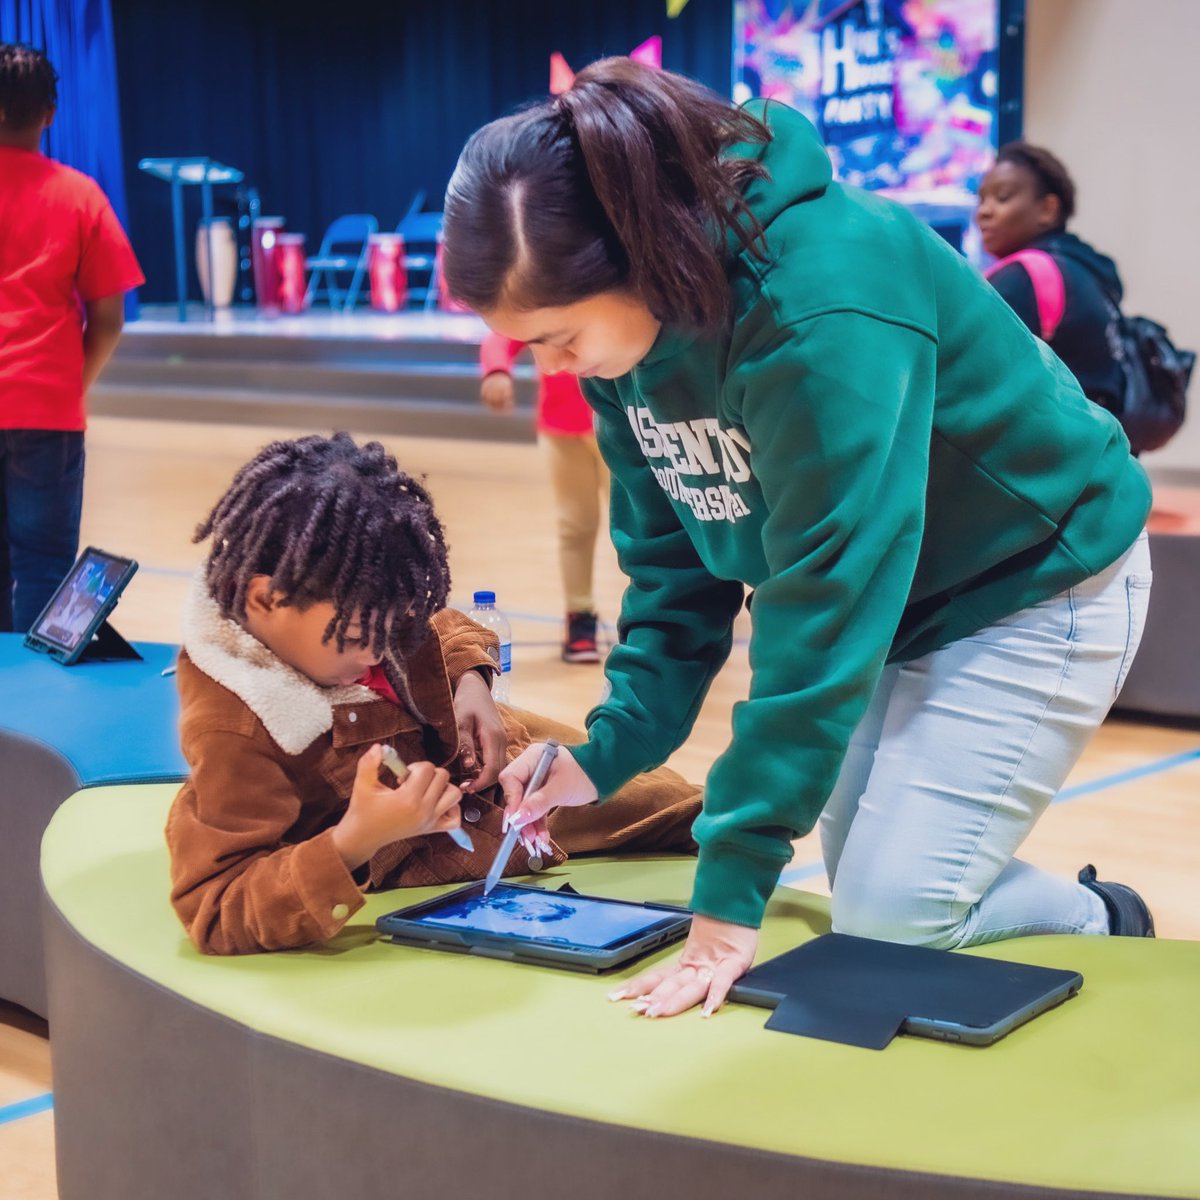 Technology is like a magic tool that makes our lives better, brighter, and more connected to each other!  @melsithole @APSTAGAcademy @APSInstructTech #theTAGexperience #TAGAppleplayground